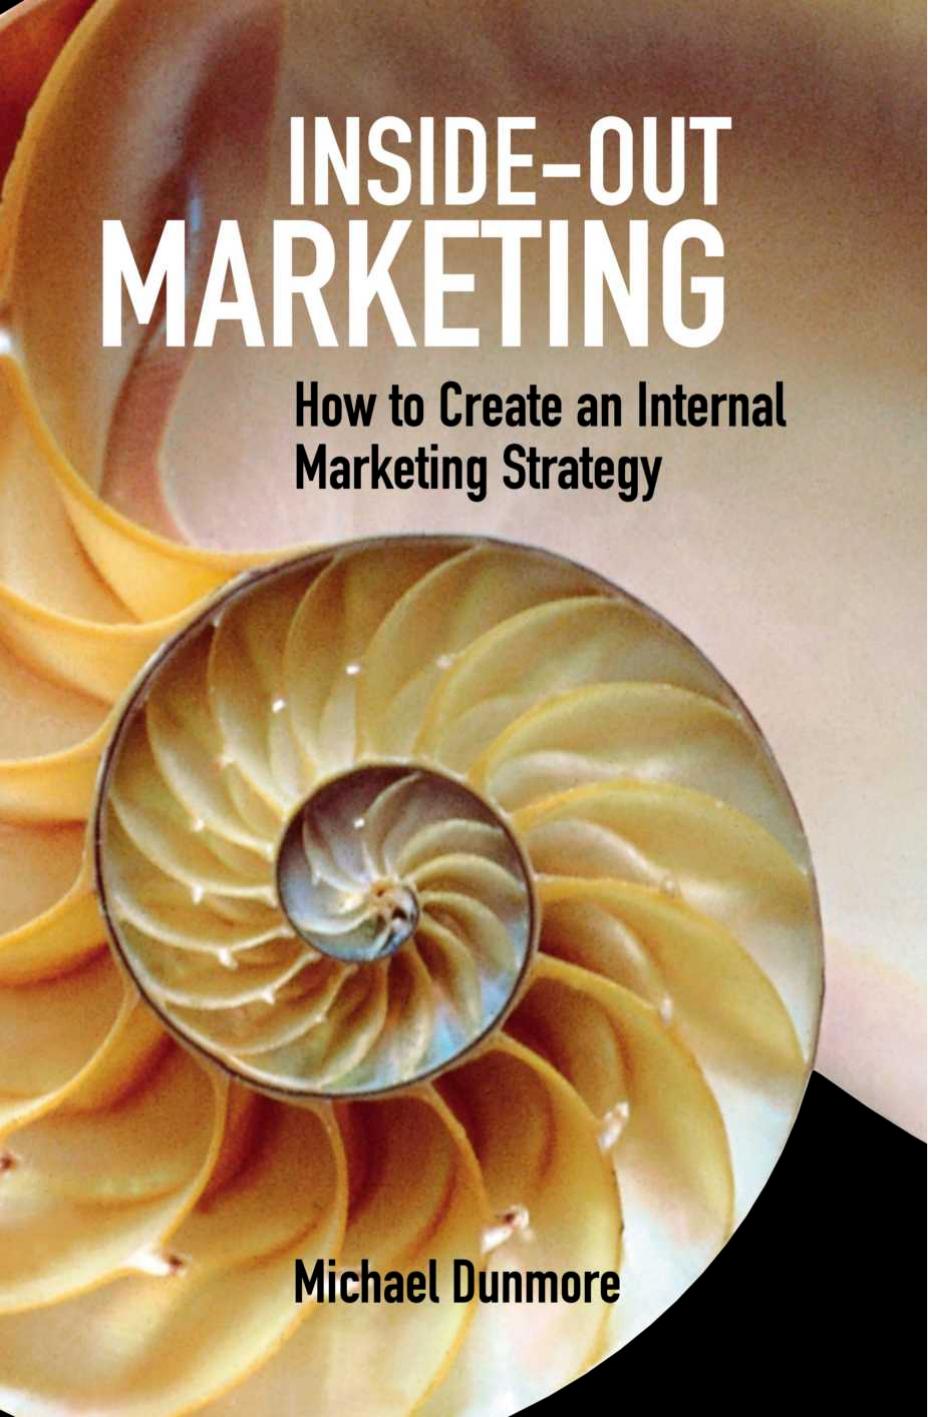 (Scott Foresman Assembly Language Programming Series) Michael Dunmore-Inside-Out Marketing How to Create an Internal Marketing Strategy-Kogan Page (2003)